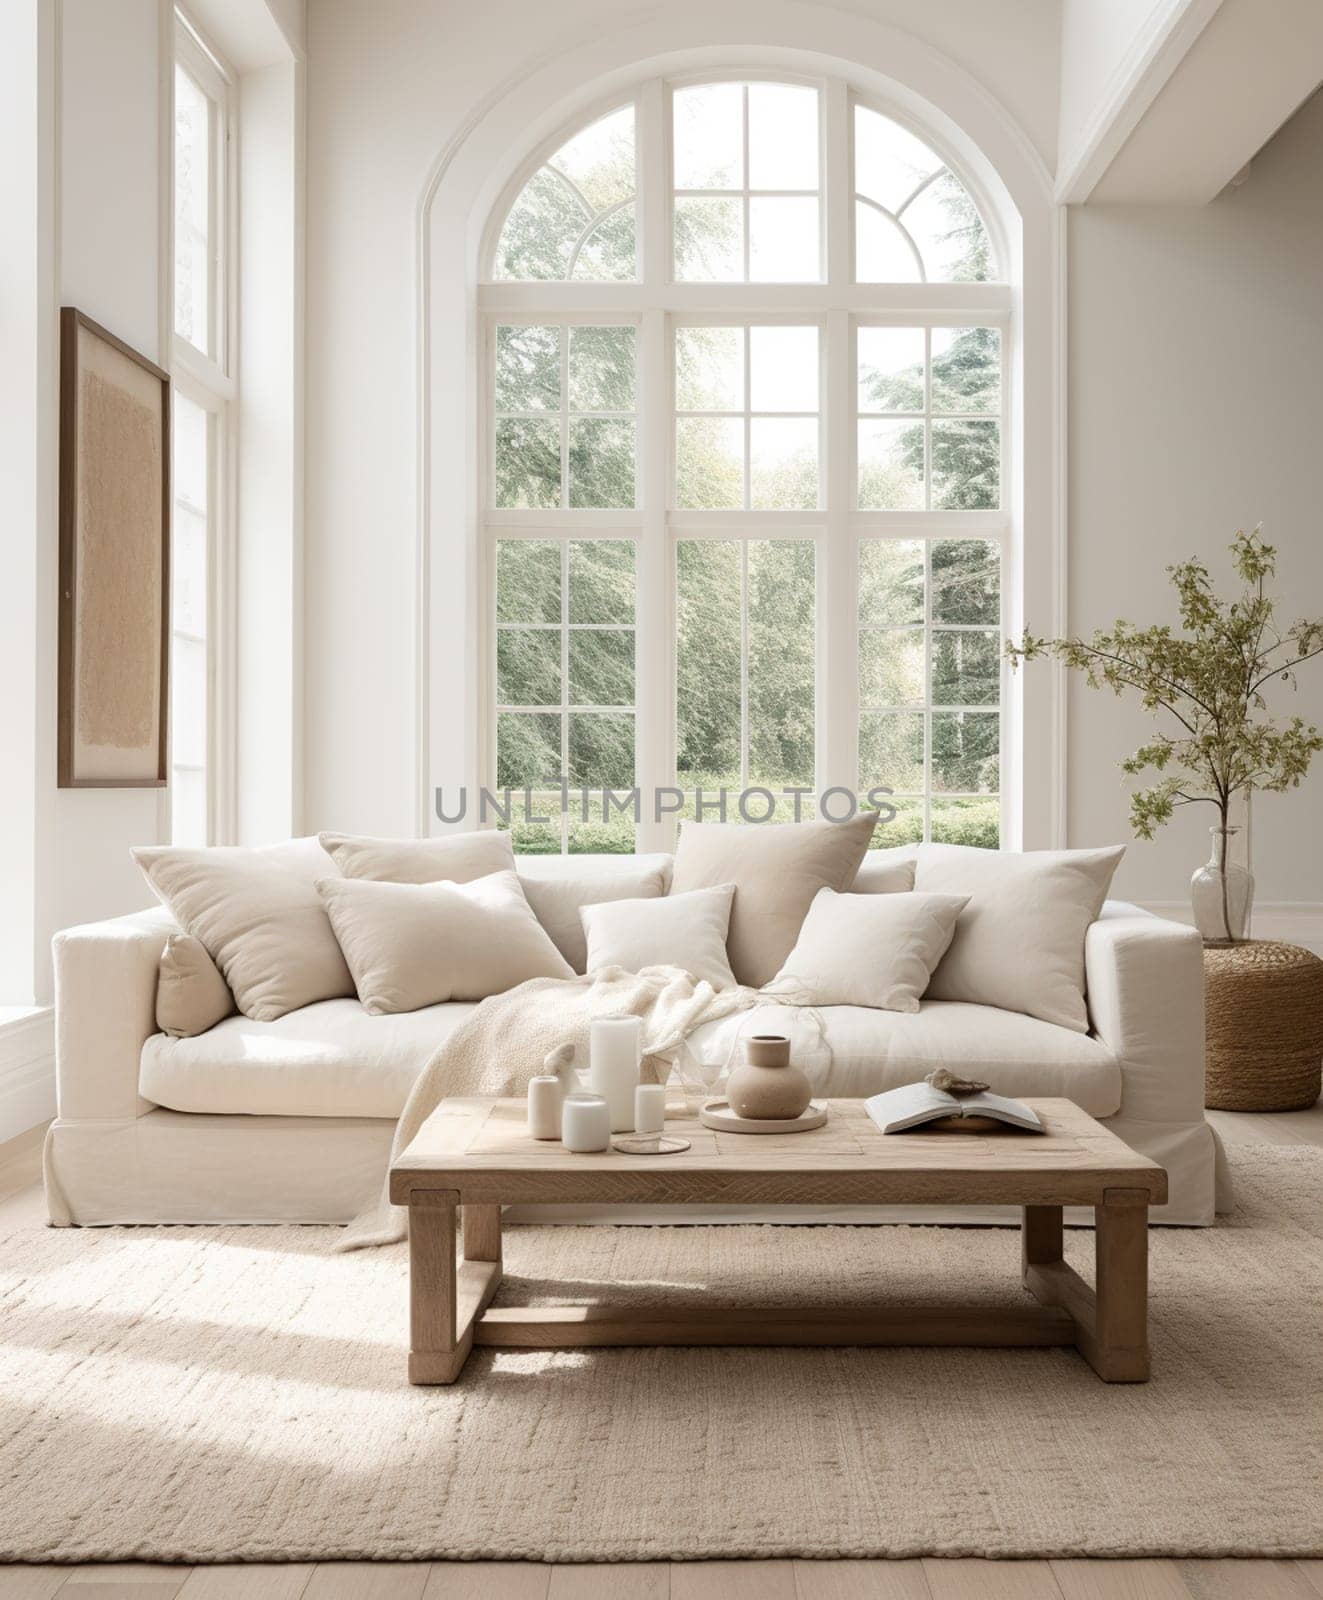 Contemporary living room with large window overlooking the backyard. 3D rendering by Andelov13